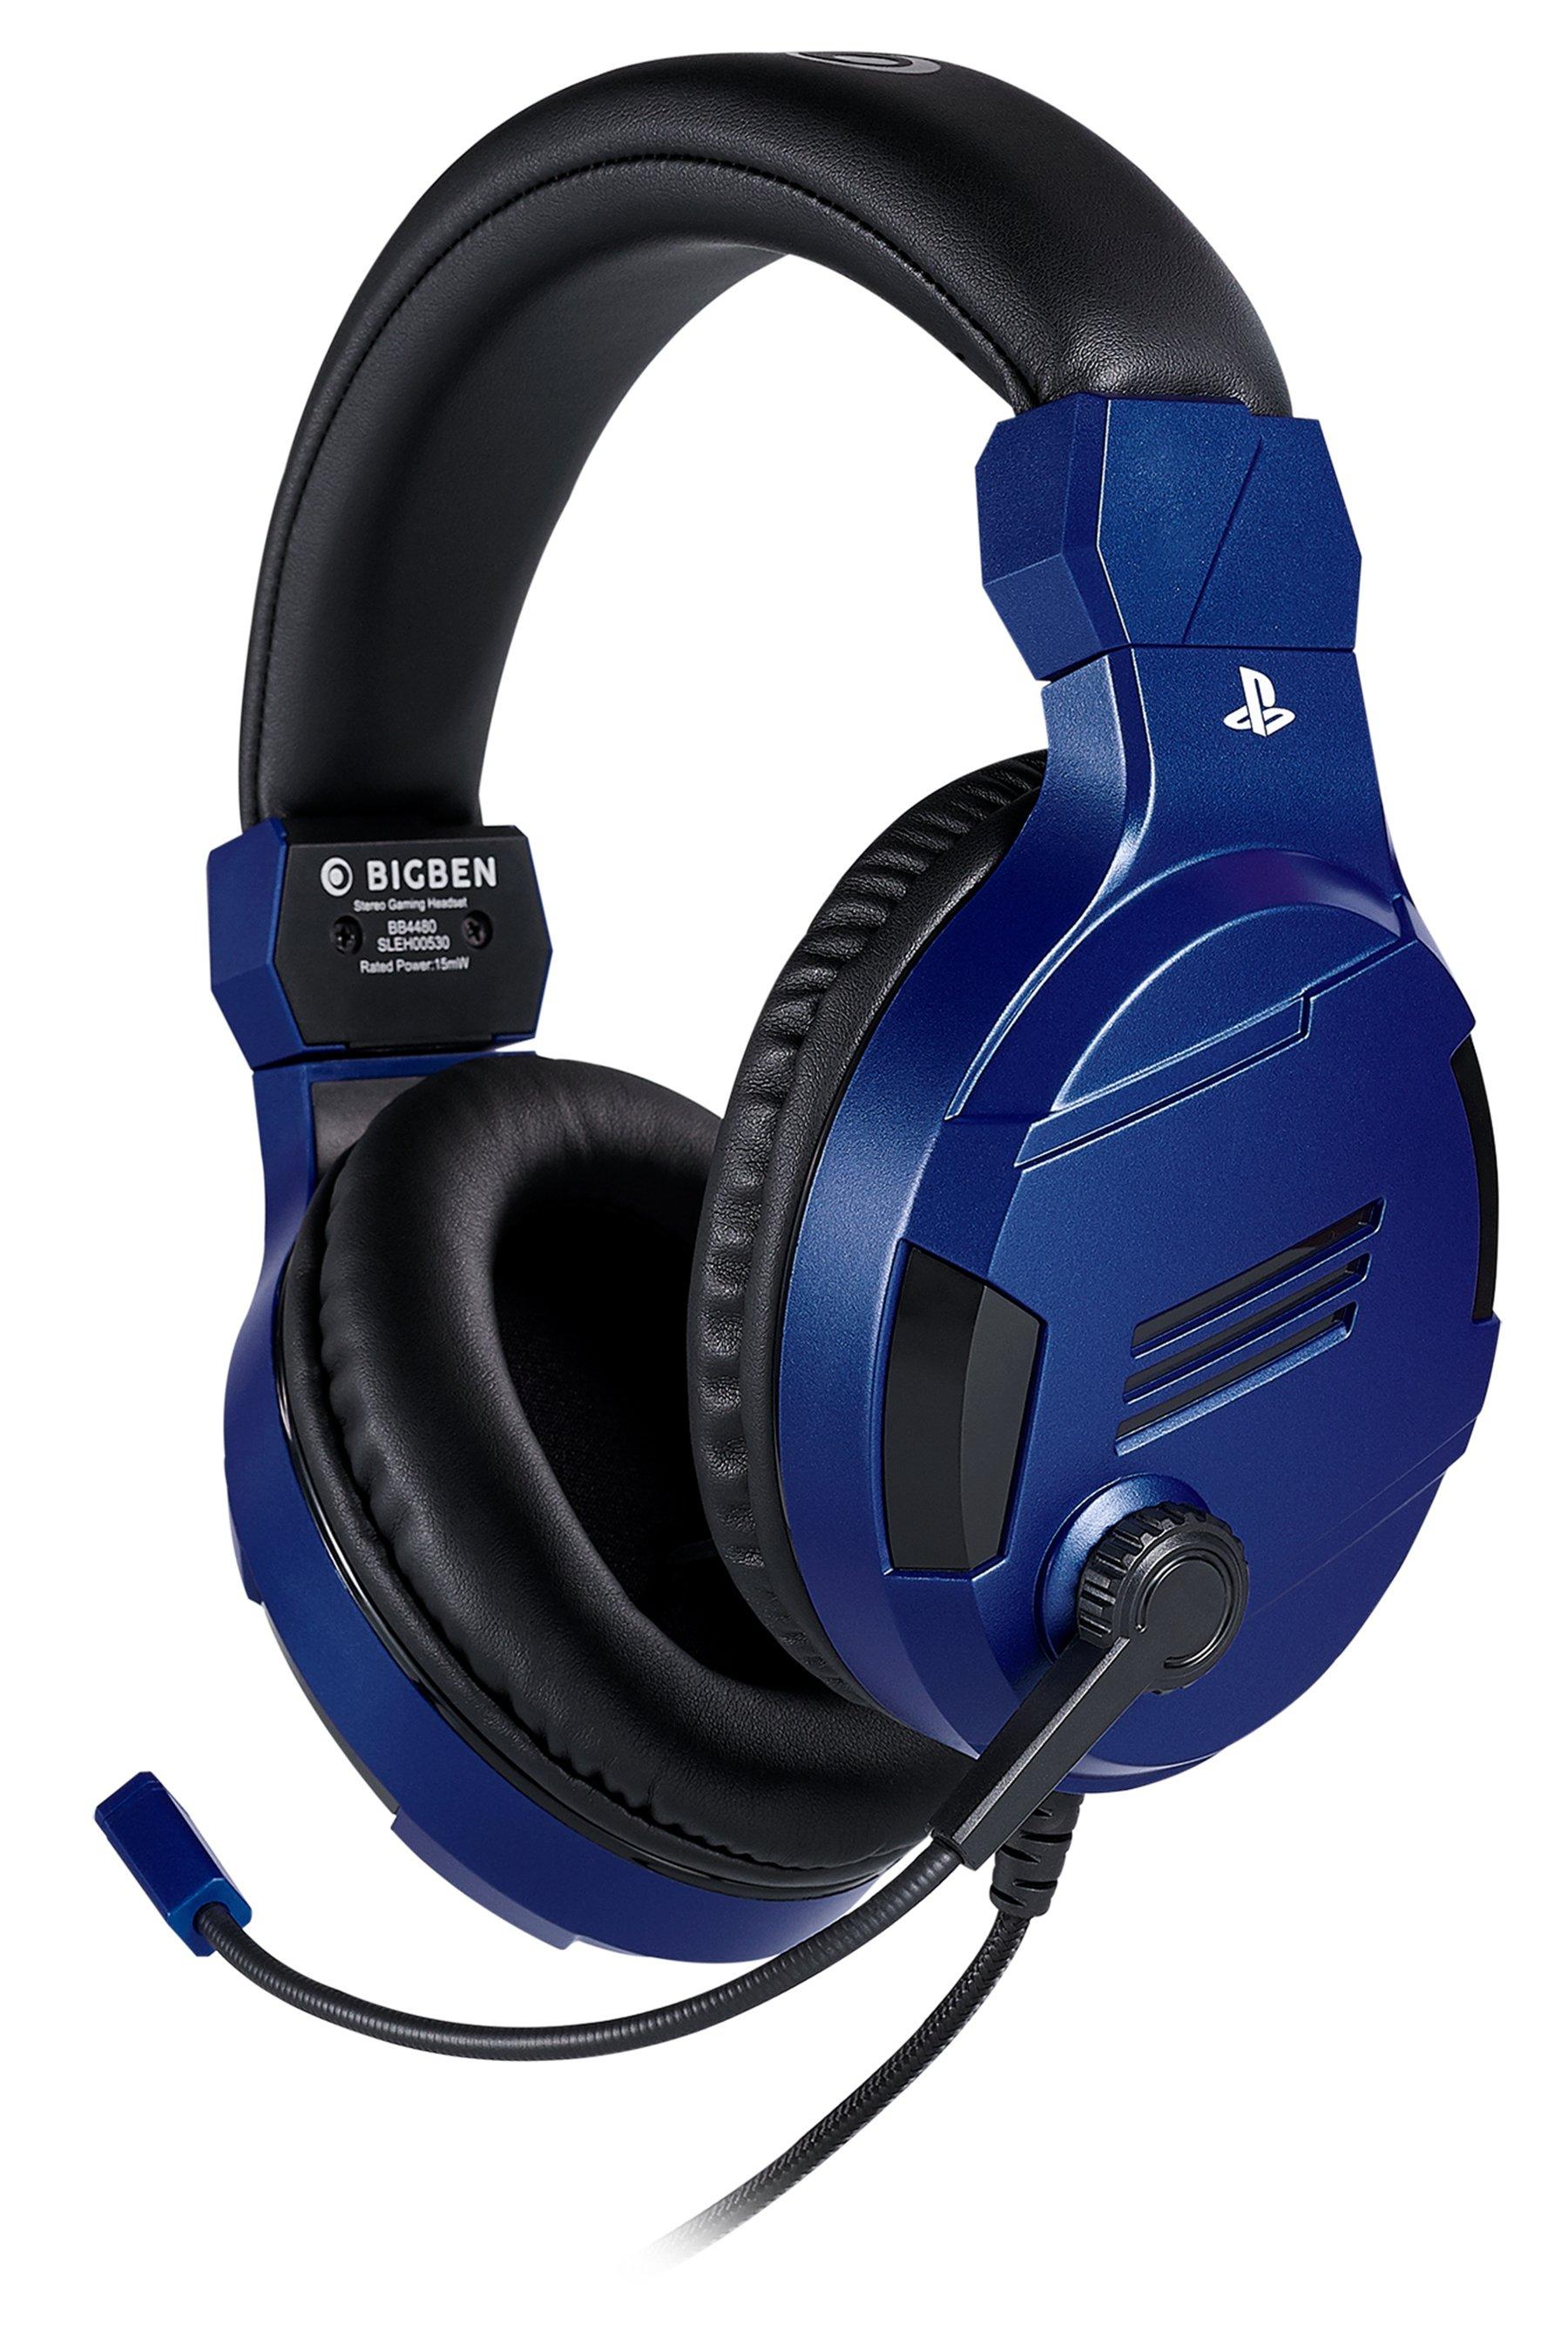 how to use sony headphones on ps4